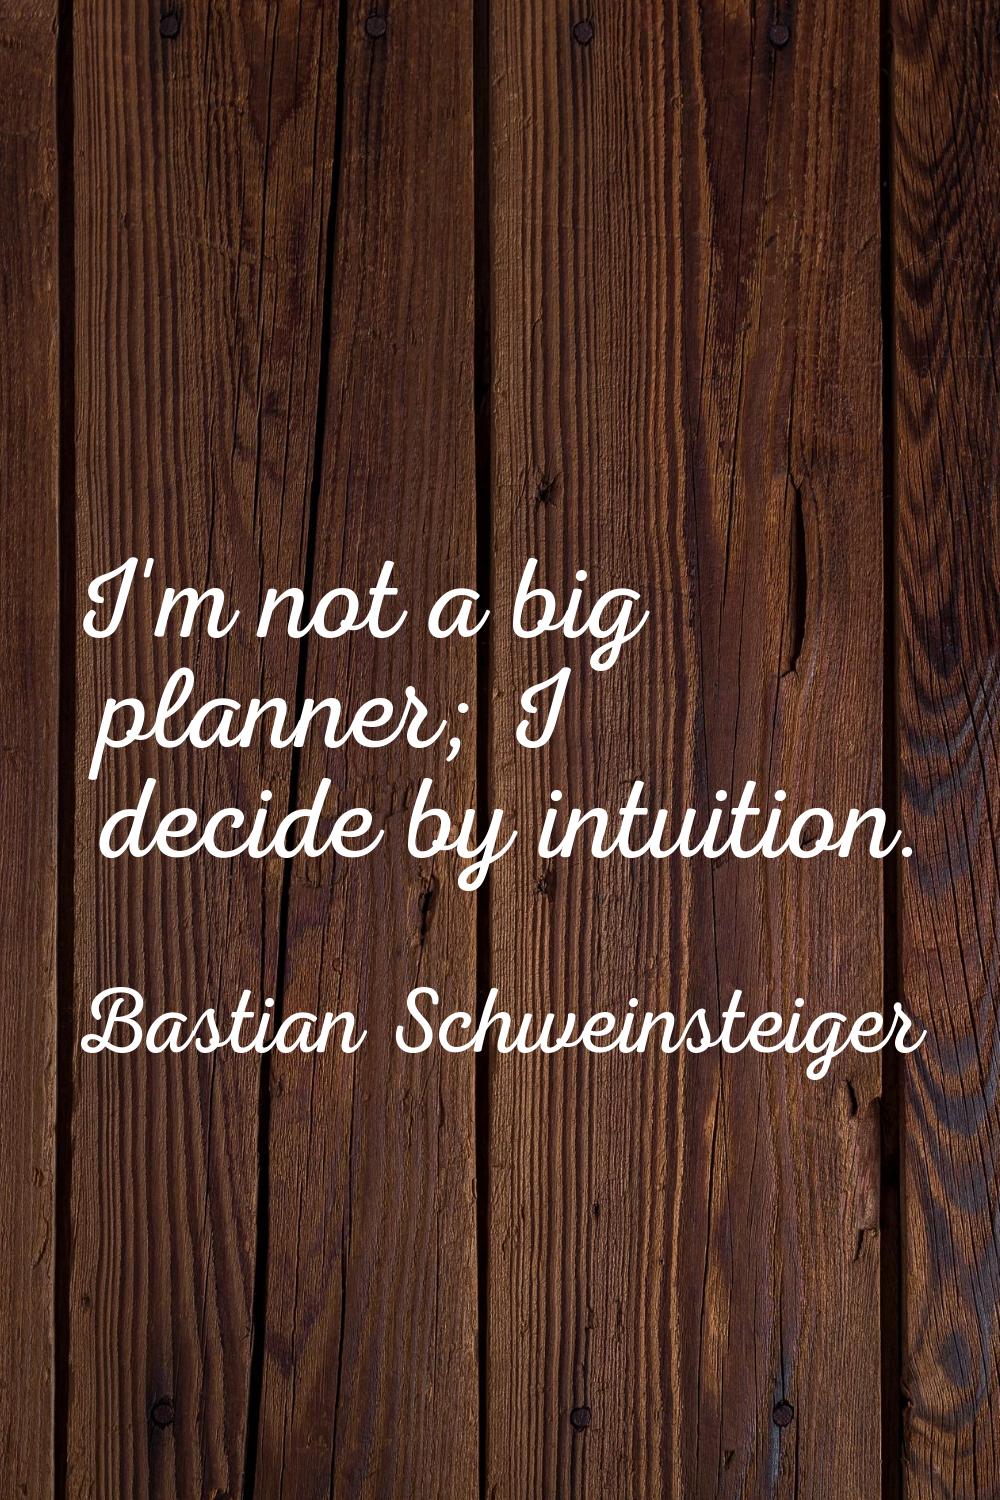 I'm not a big planner; I decide by intuition.